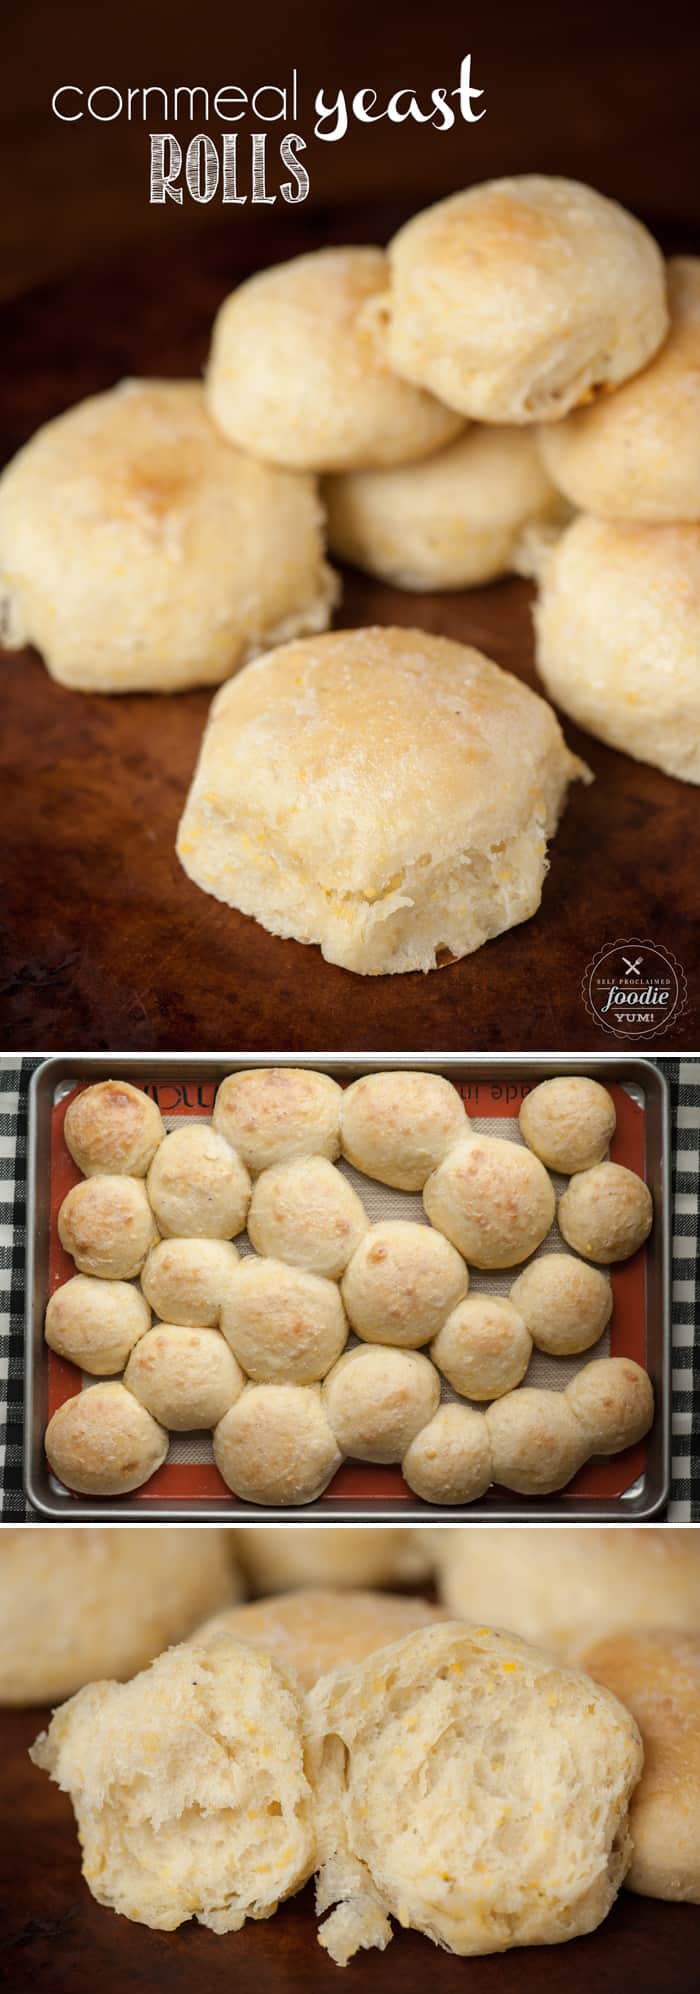 These super softy and tasty Cornmeal Yeast Rolls can be served as dinner rolls or you can use them as perfect buns for burgers, pulled pork, or sliders.